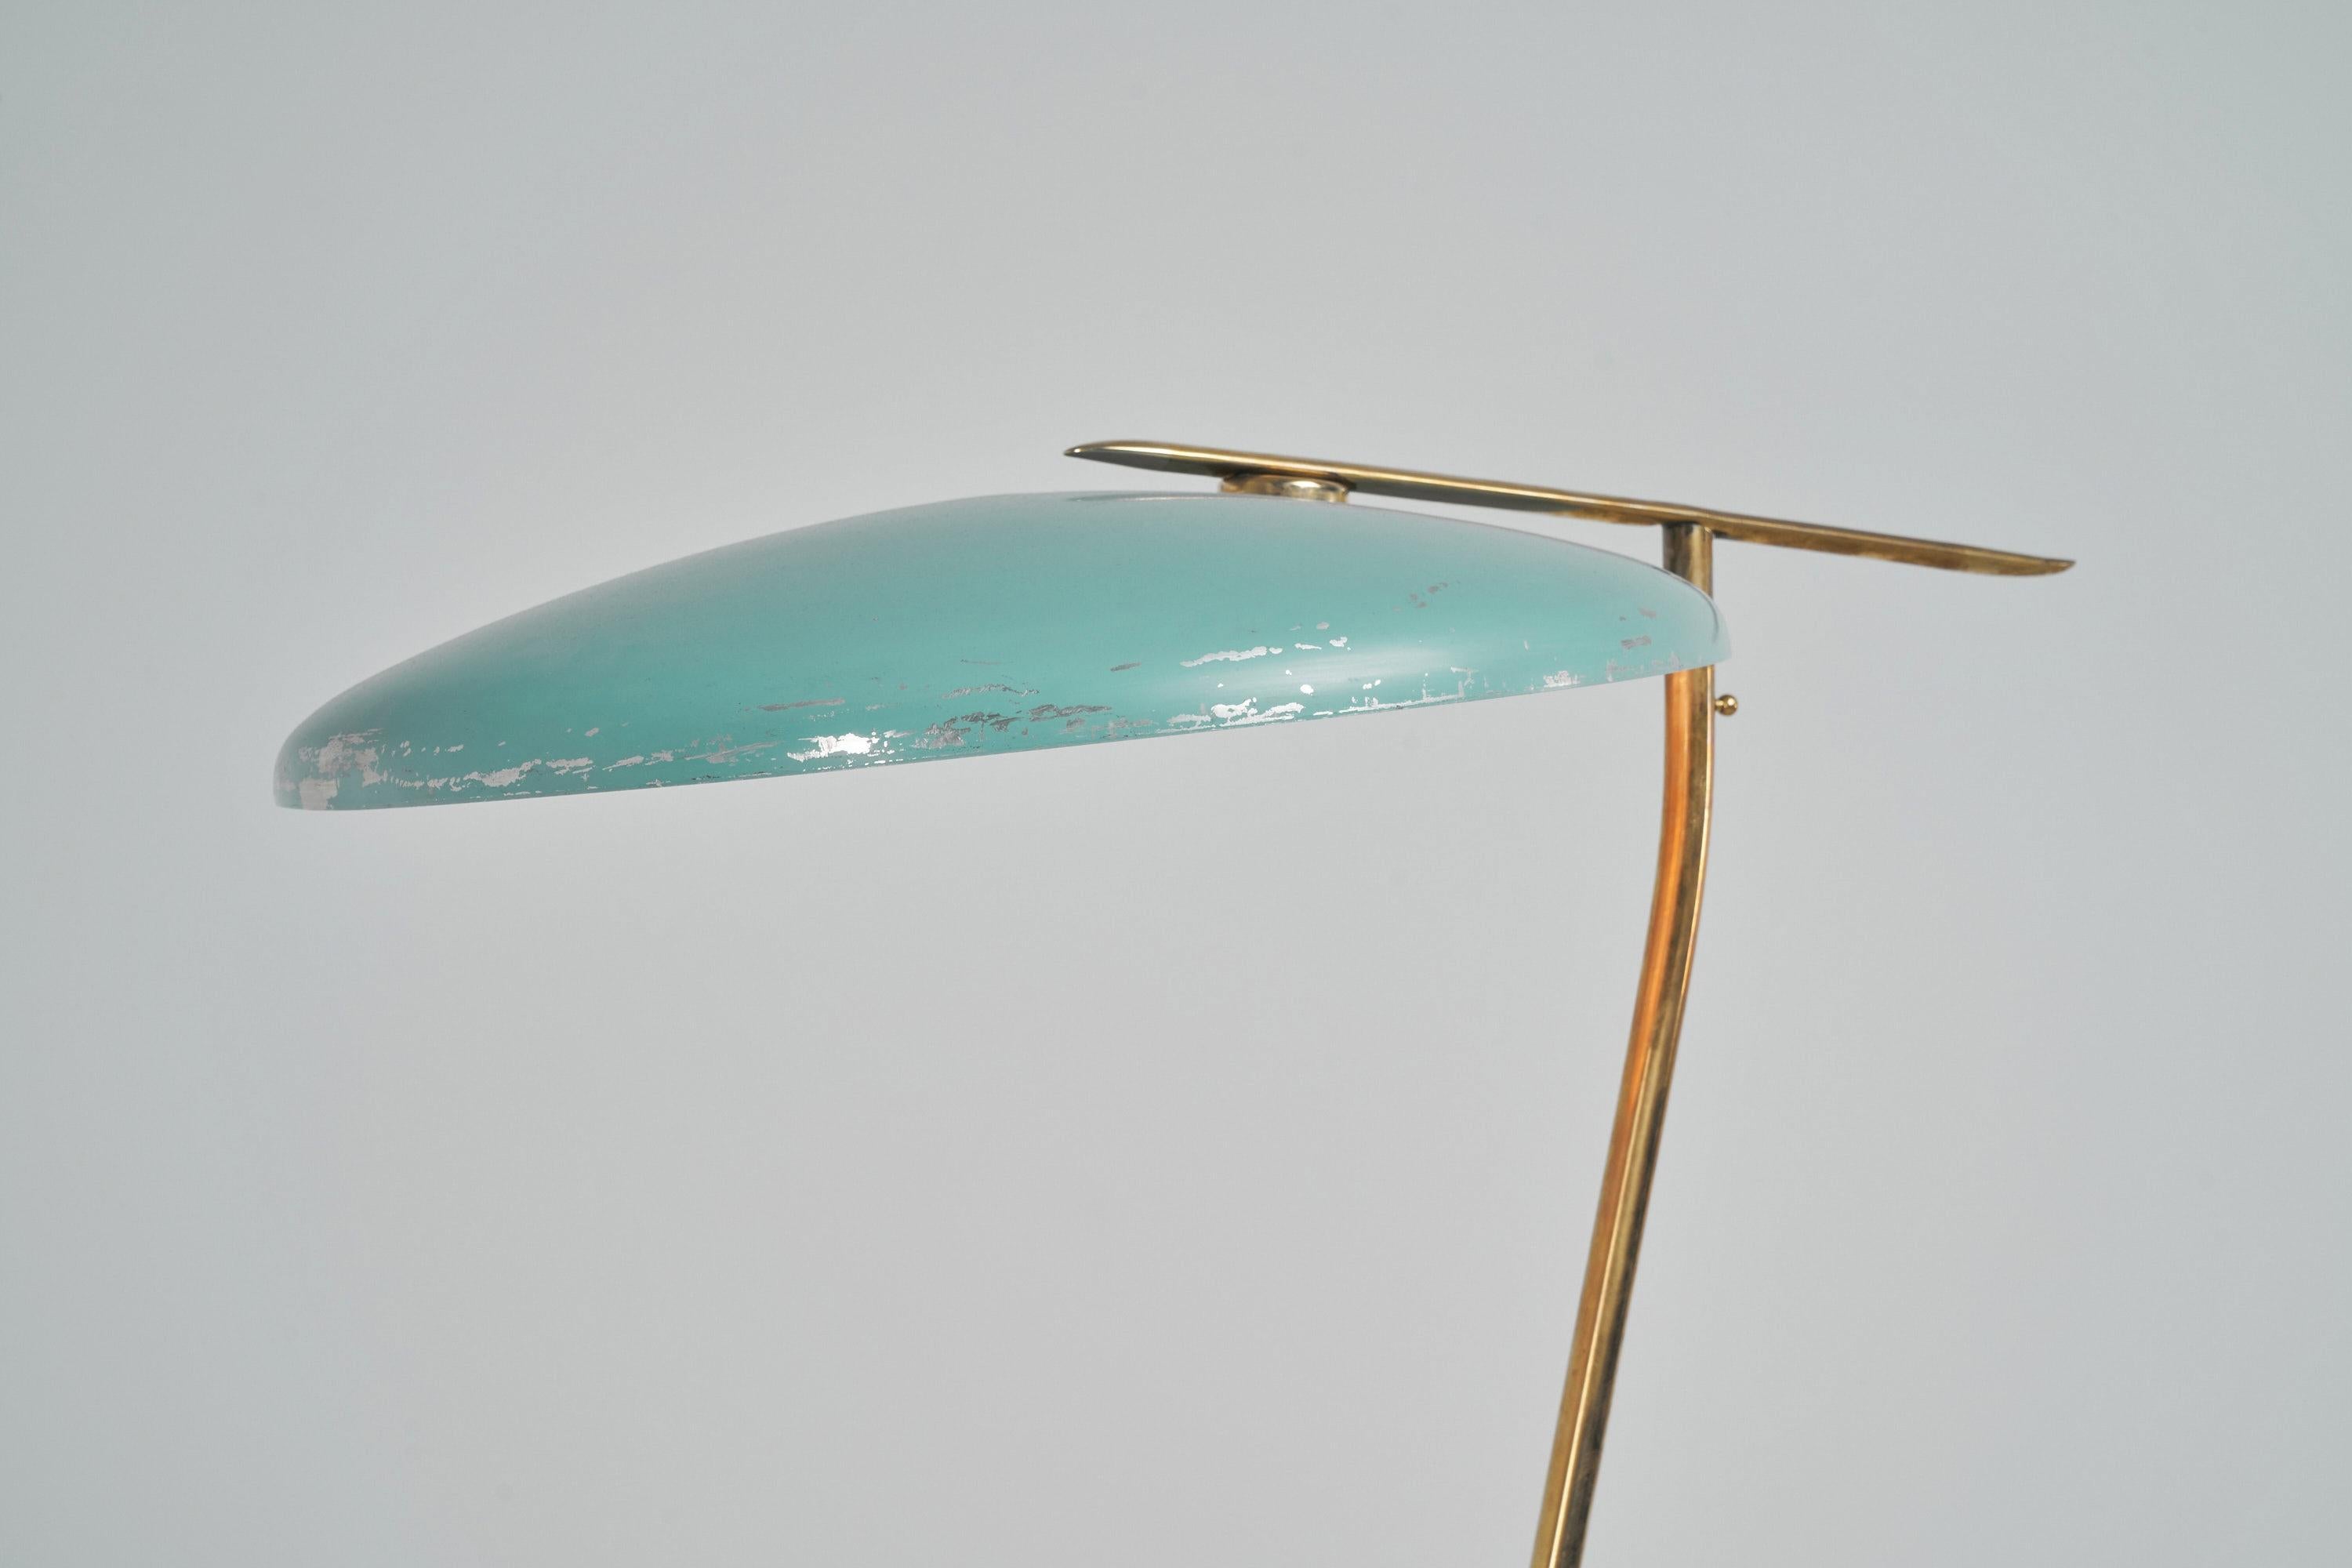 Rare large floor lamp designed by Oscar Torlasco and manufactured by Lumi, Italy 1950. This large sized floor lamp has nice proportions and an interesting asymmetrical shape. The large brass base is slightly bent so it will keep its balance with the